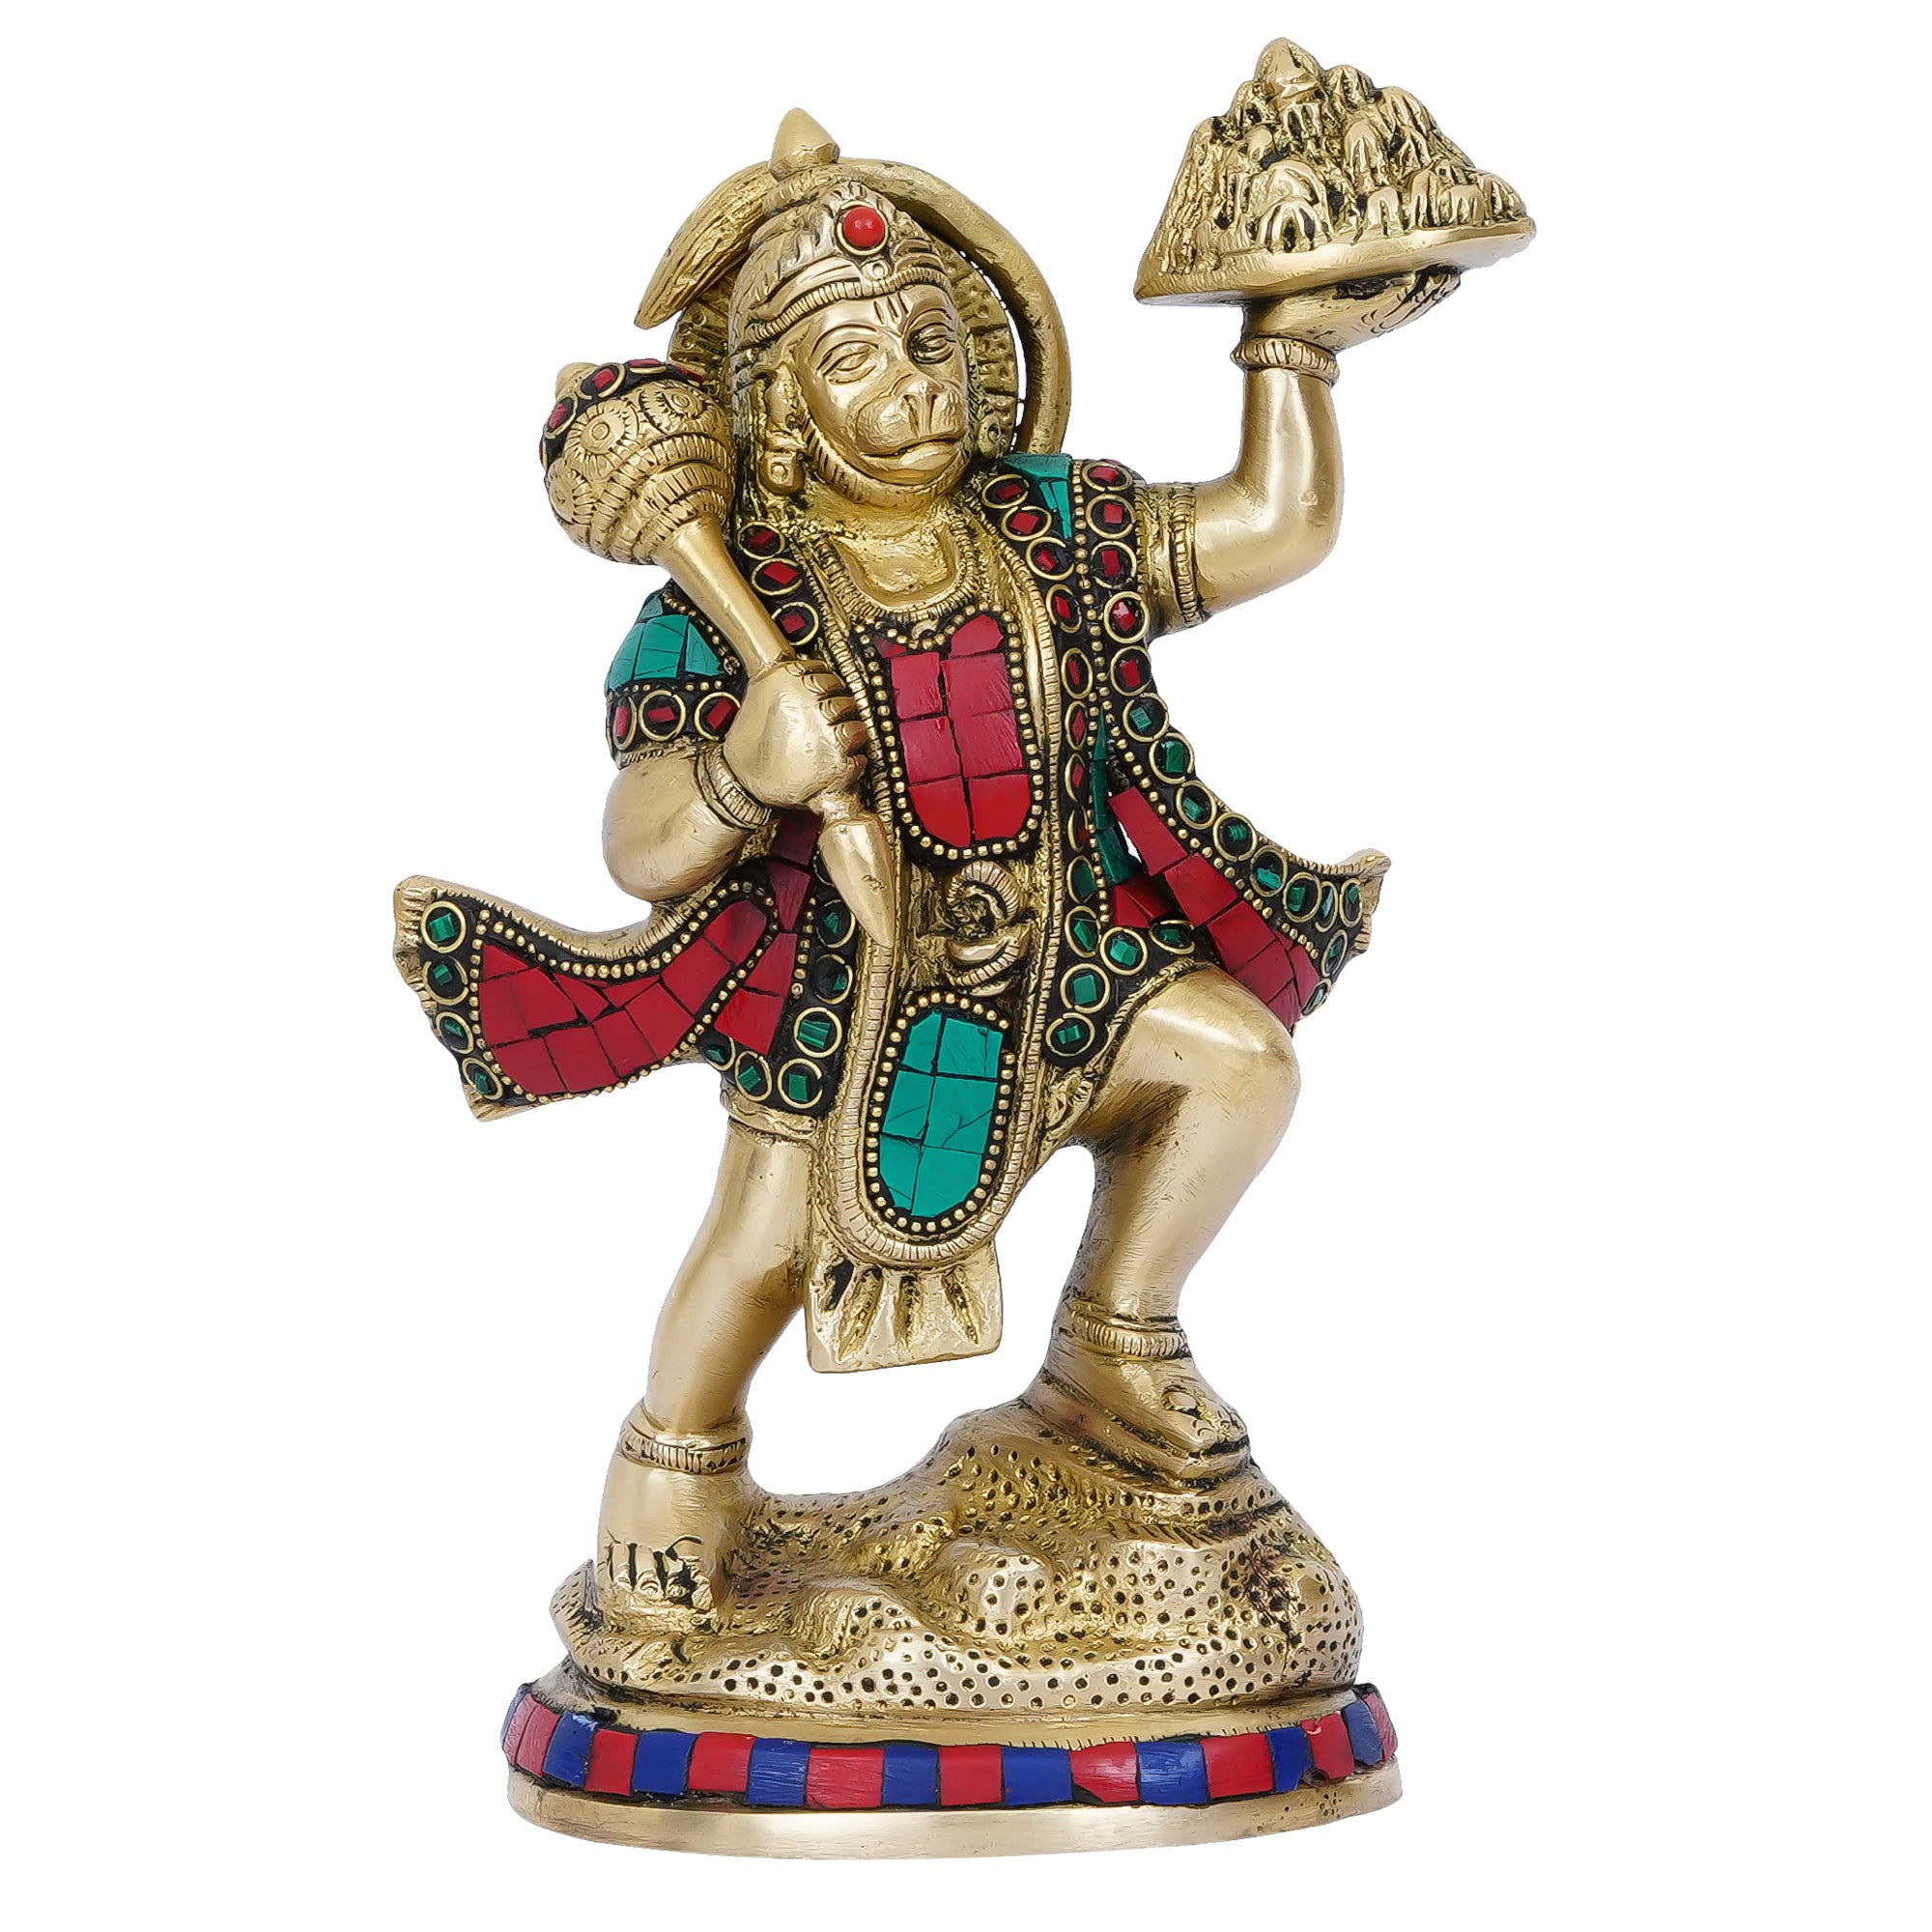 Colorful Stone Work Handcrafted Brass Lord Hanuman Statue Carrying Sanjeevani Mountain 2